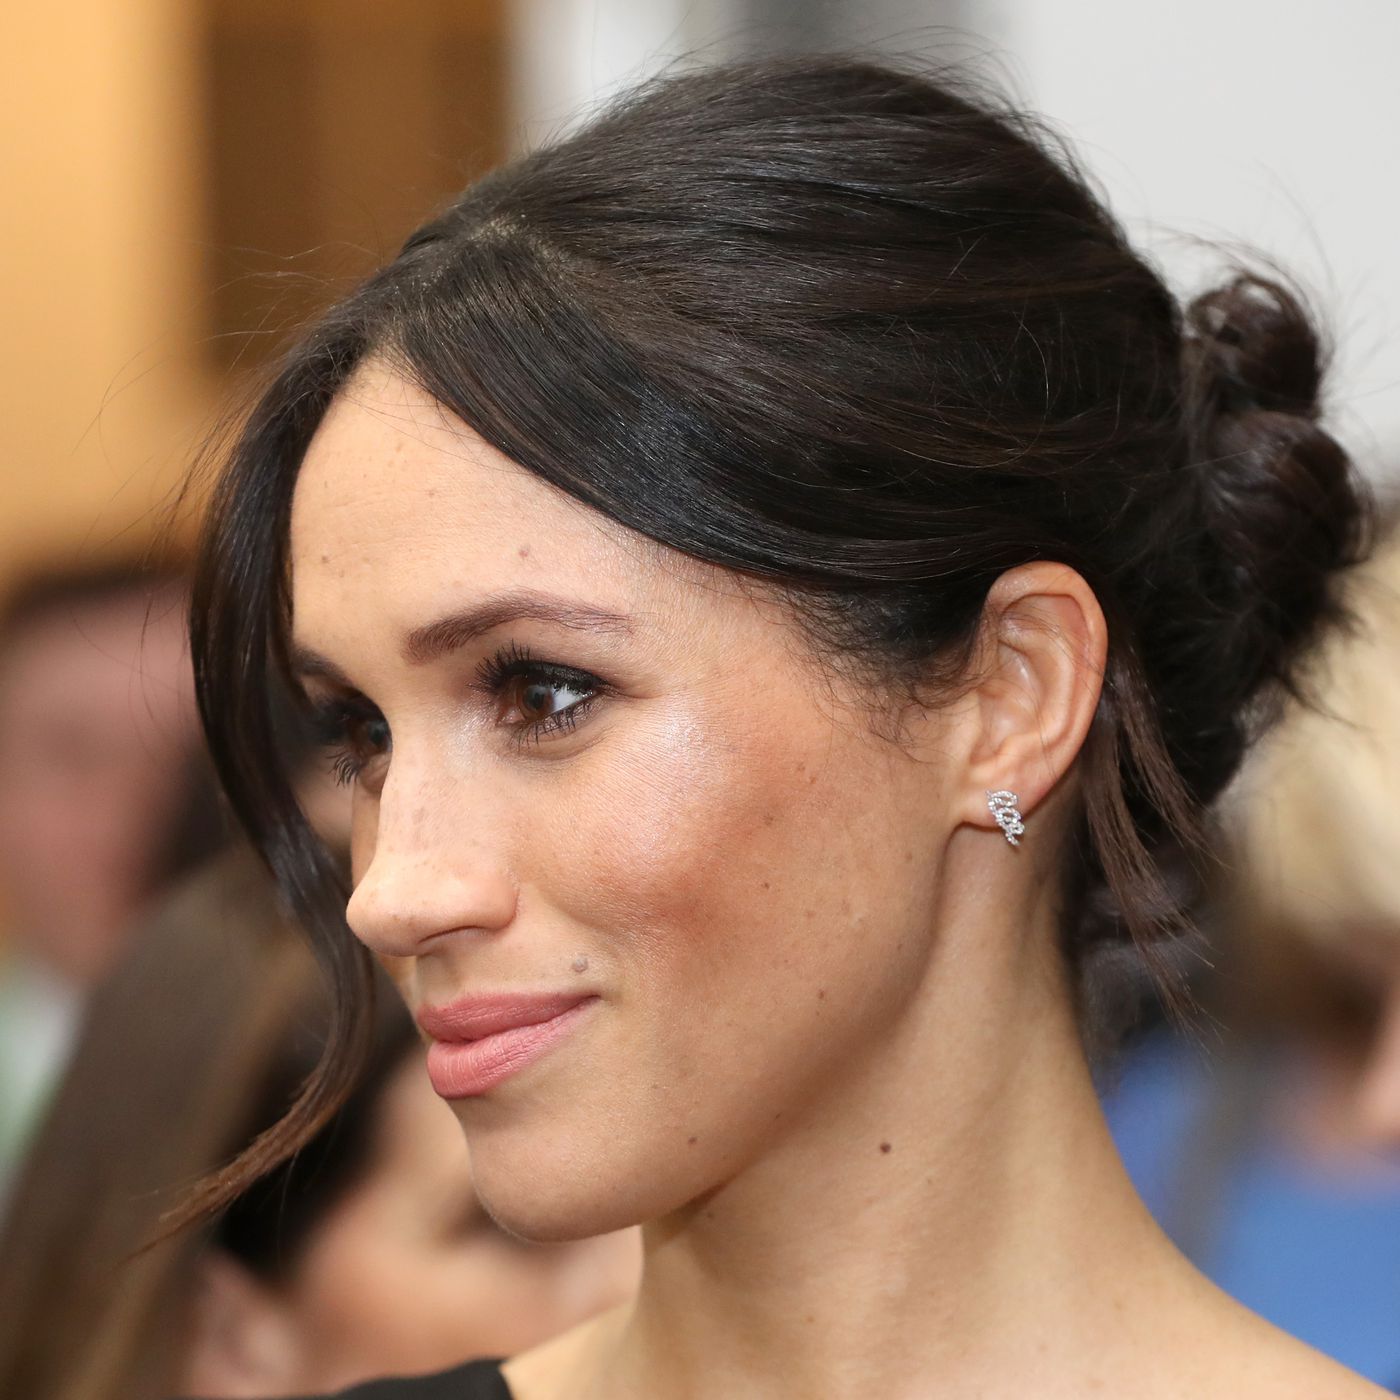 Meghan Markle's Beauty Products, Thoroughly Investigated - Racked